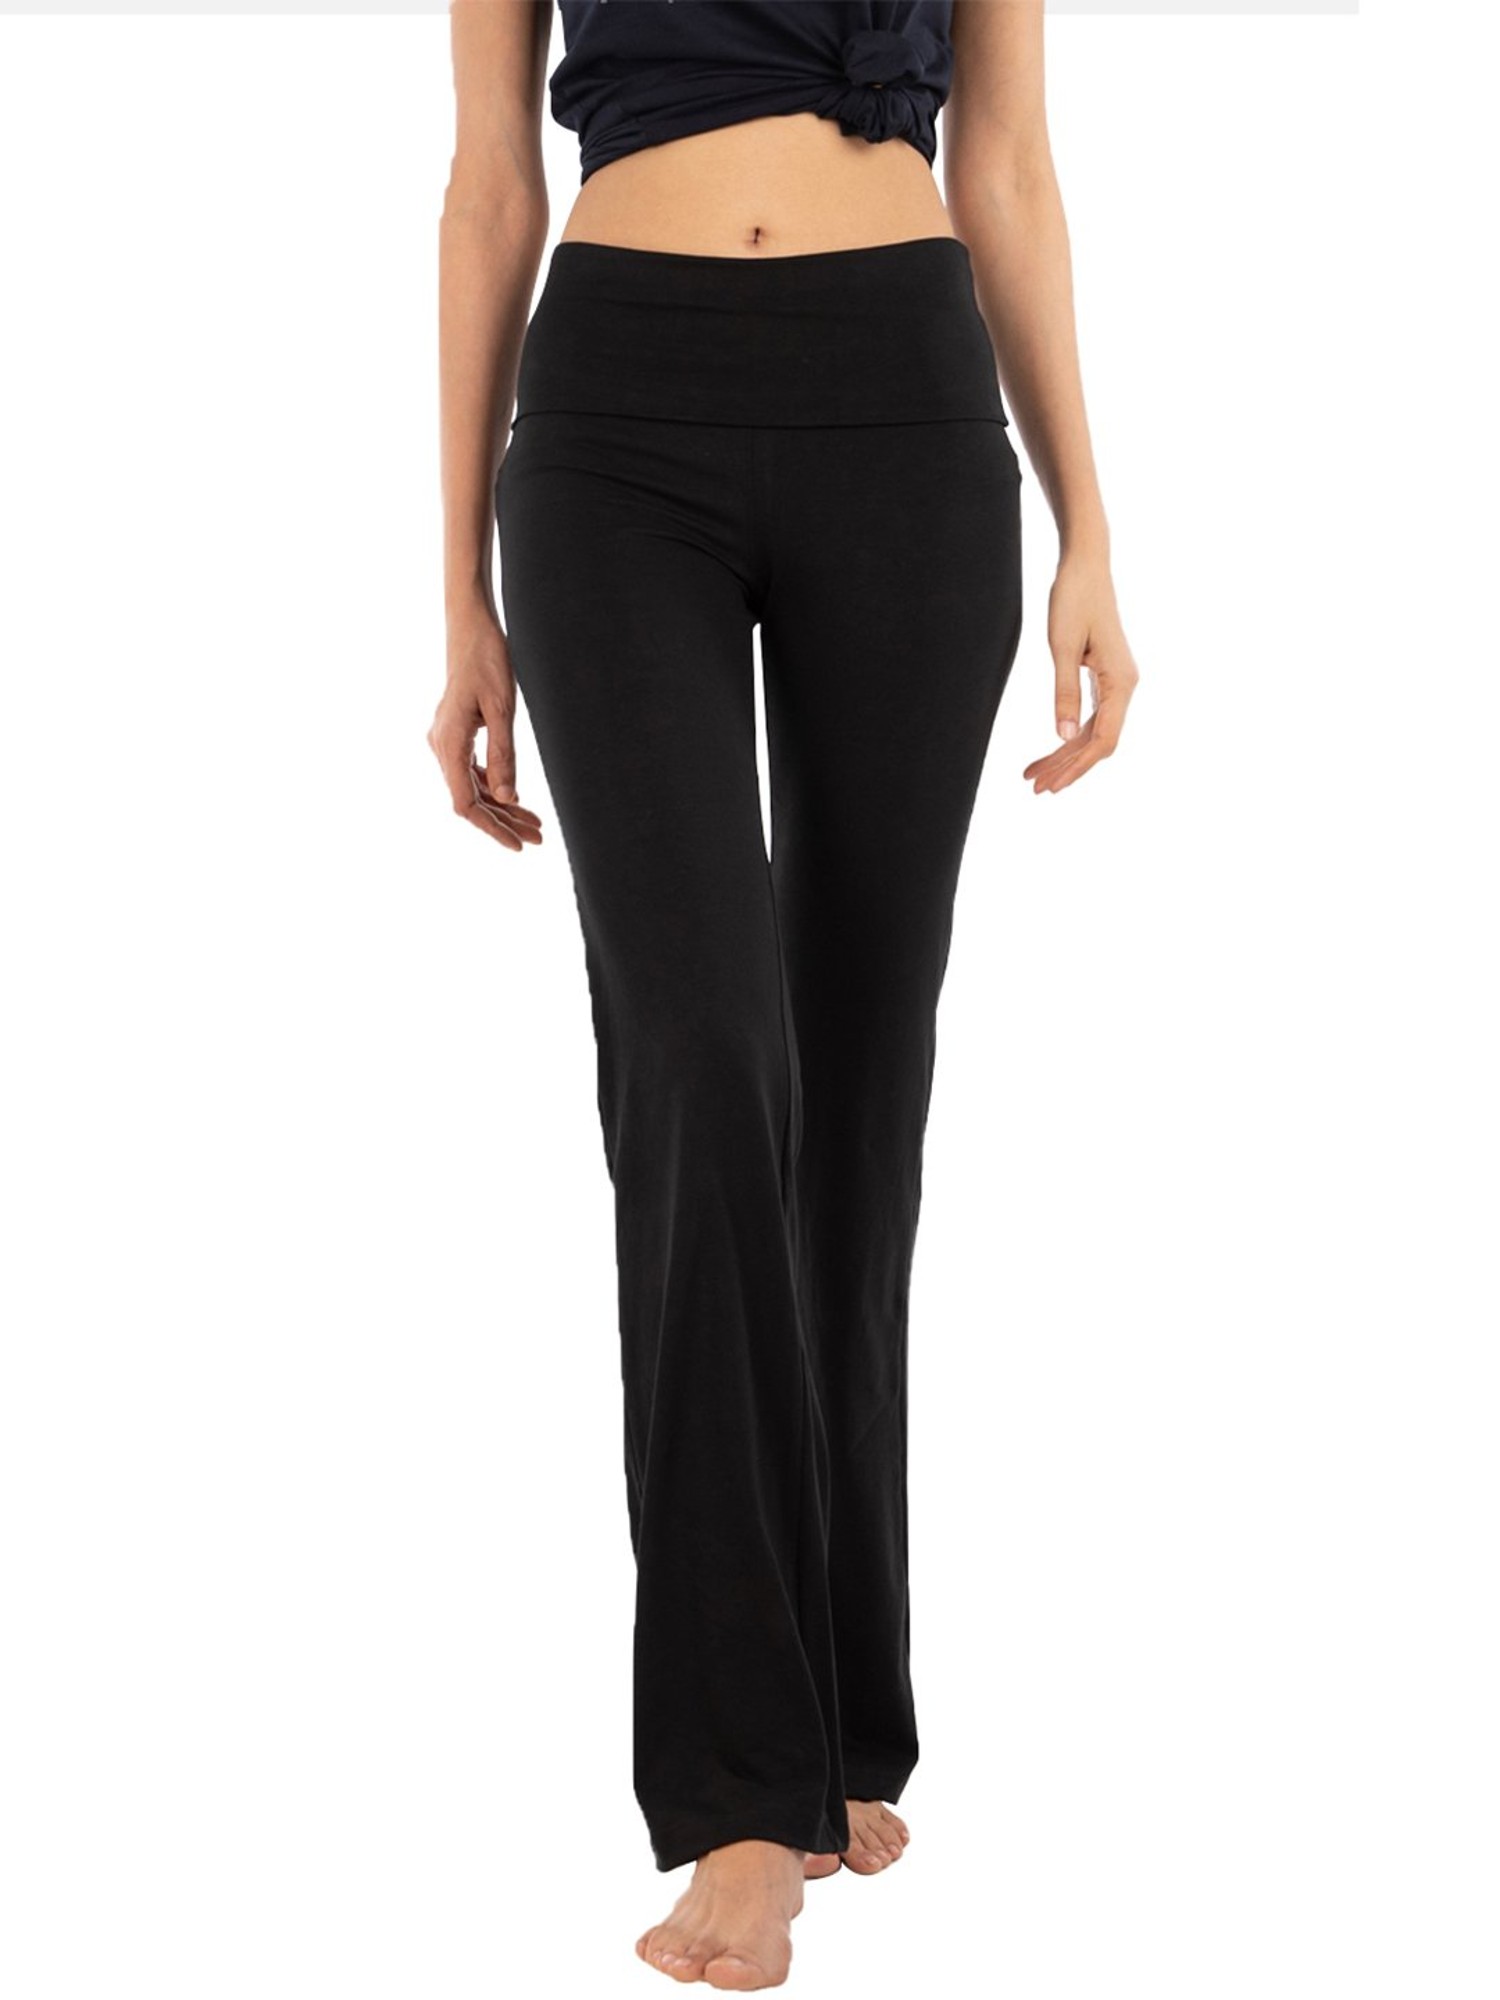 Buy Online Black Polyester Cotton Pants for Women  Girls at Best Prices in  Biba IndiaATHLEISU006SS